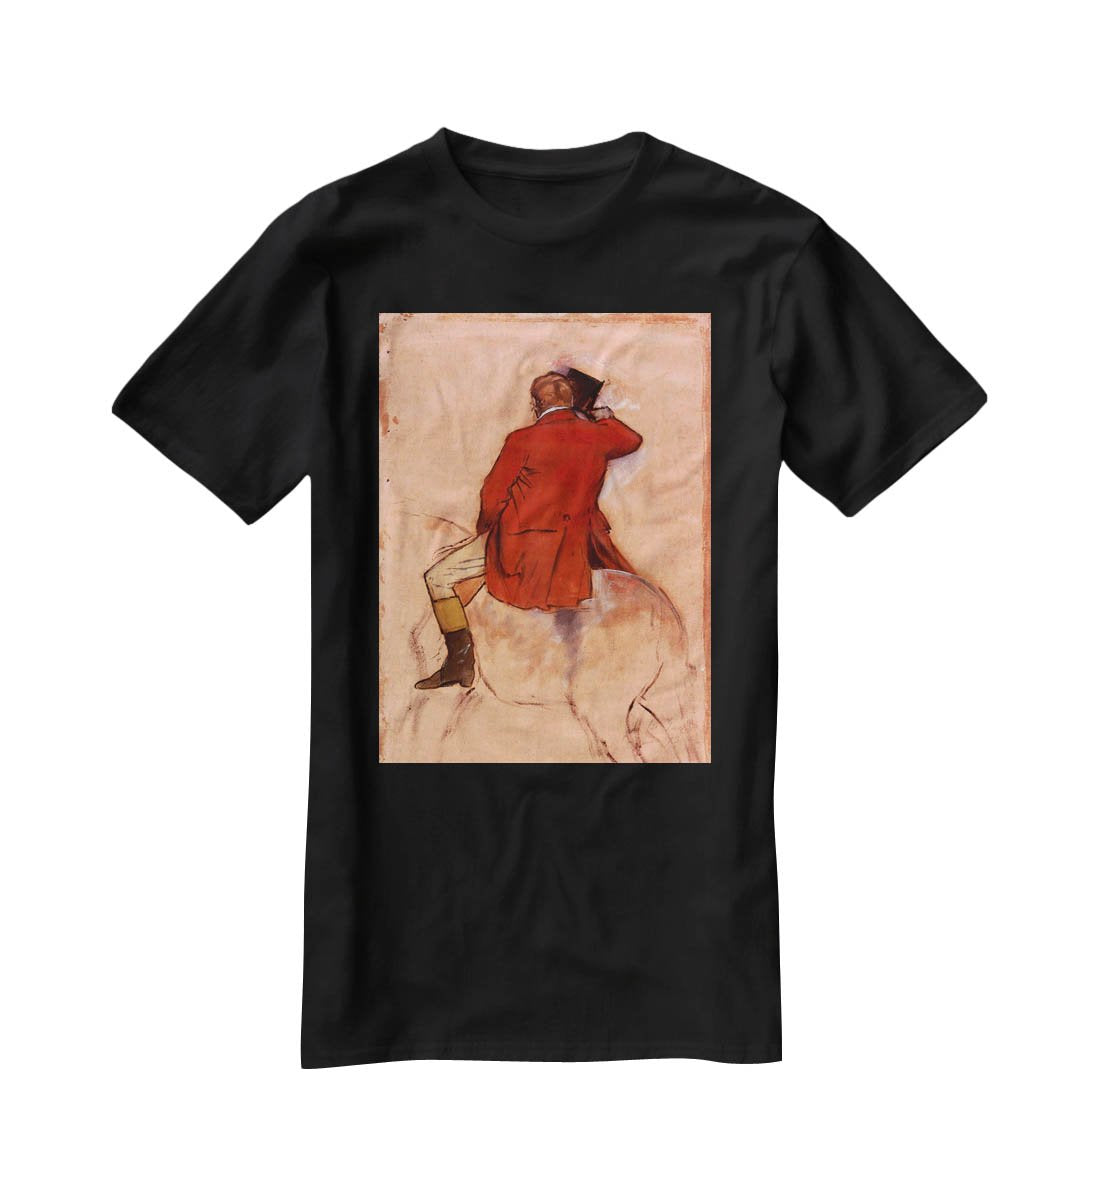 Rider with red jacket by Degas T-Shirt - Canvas Art Rocks - 1